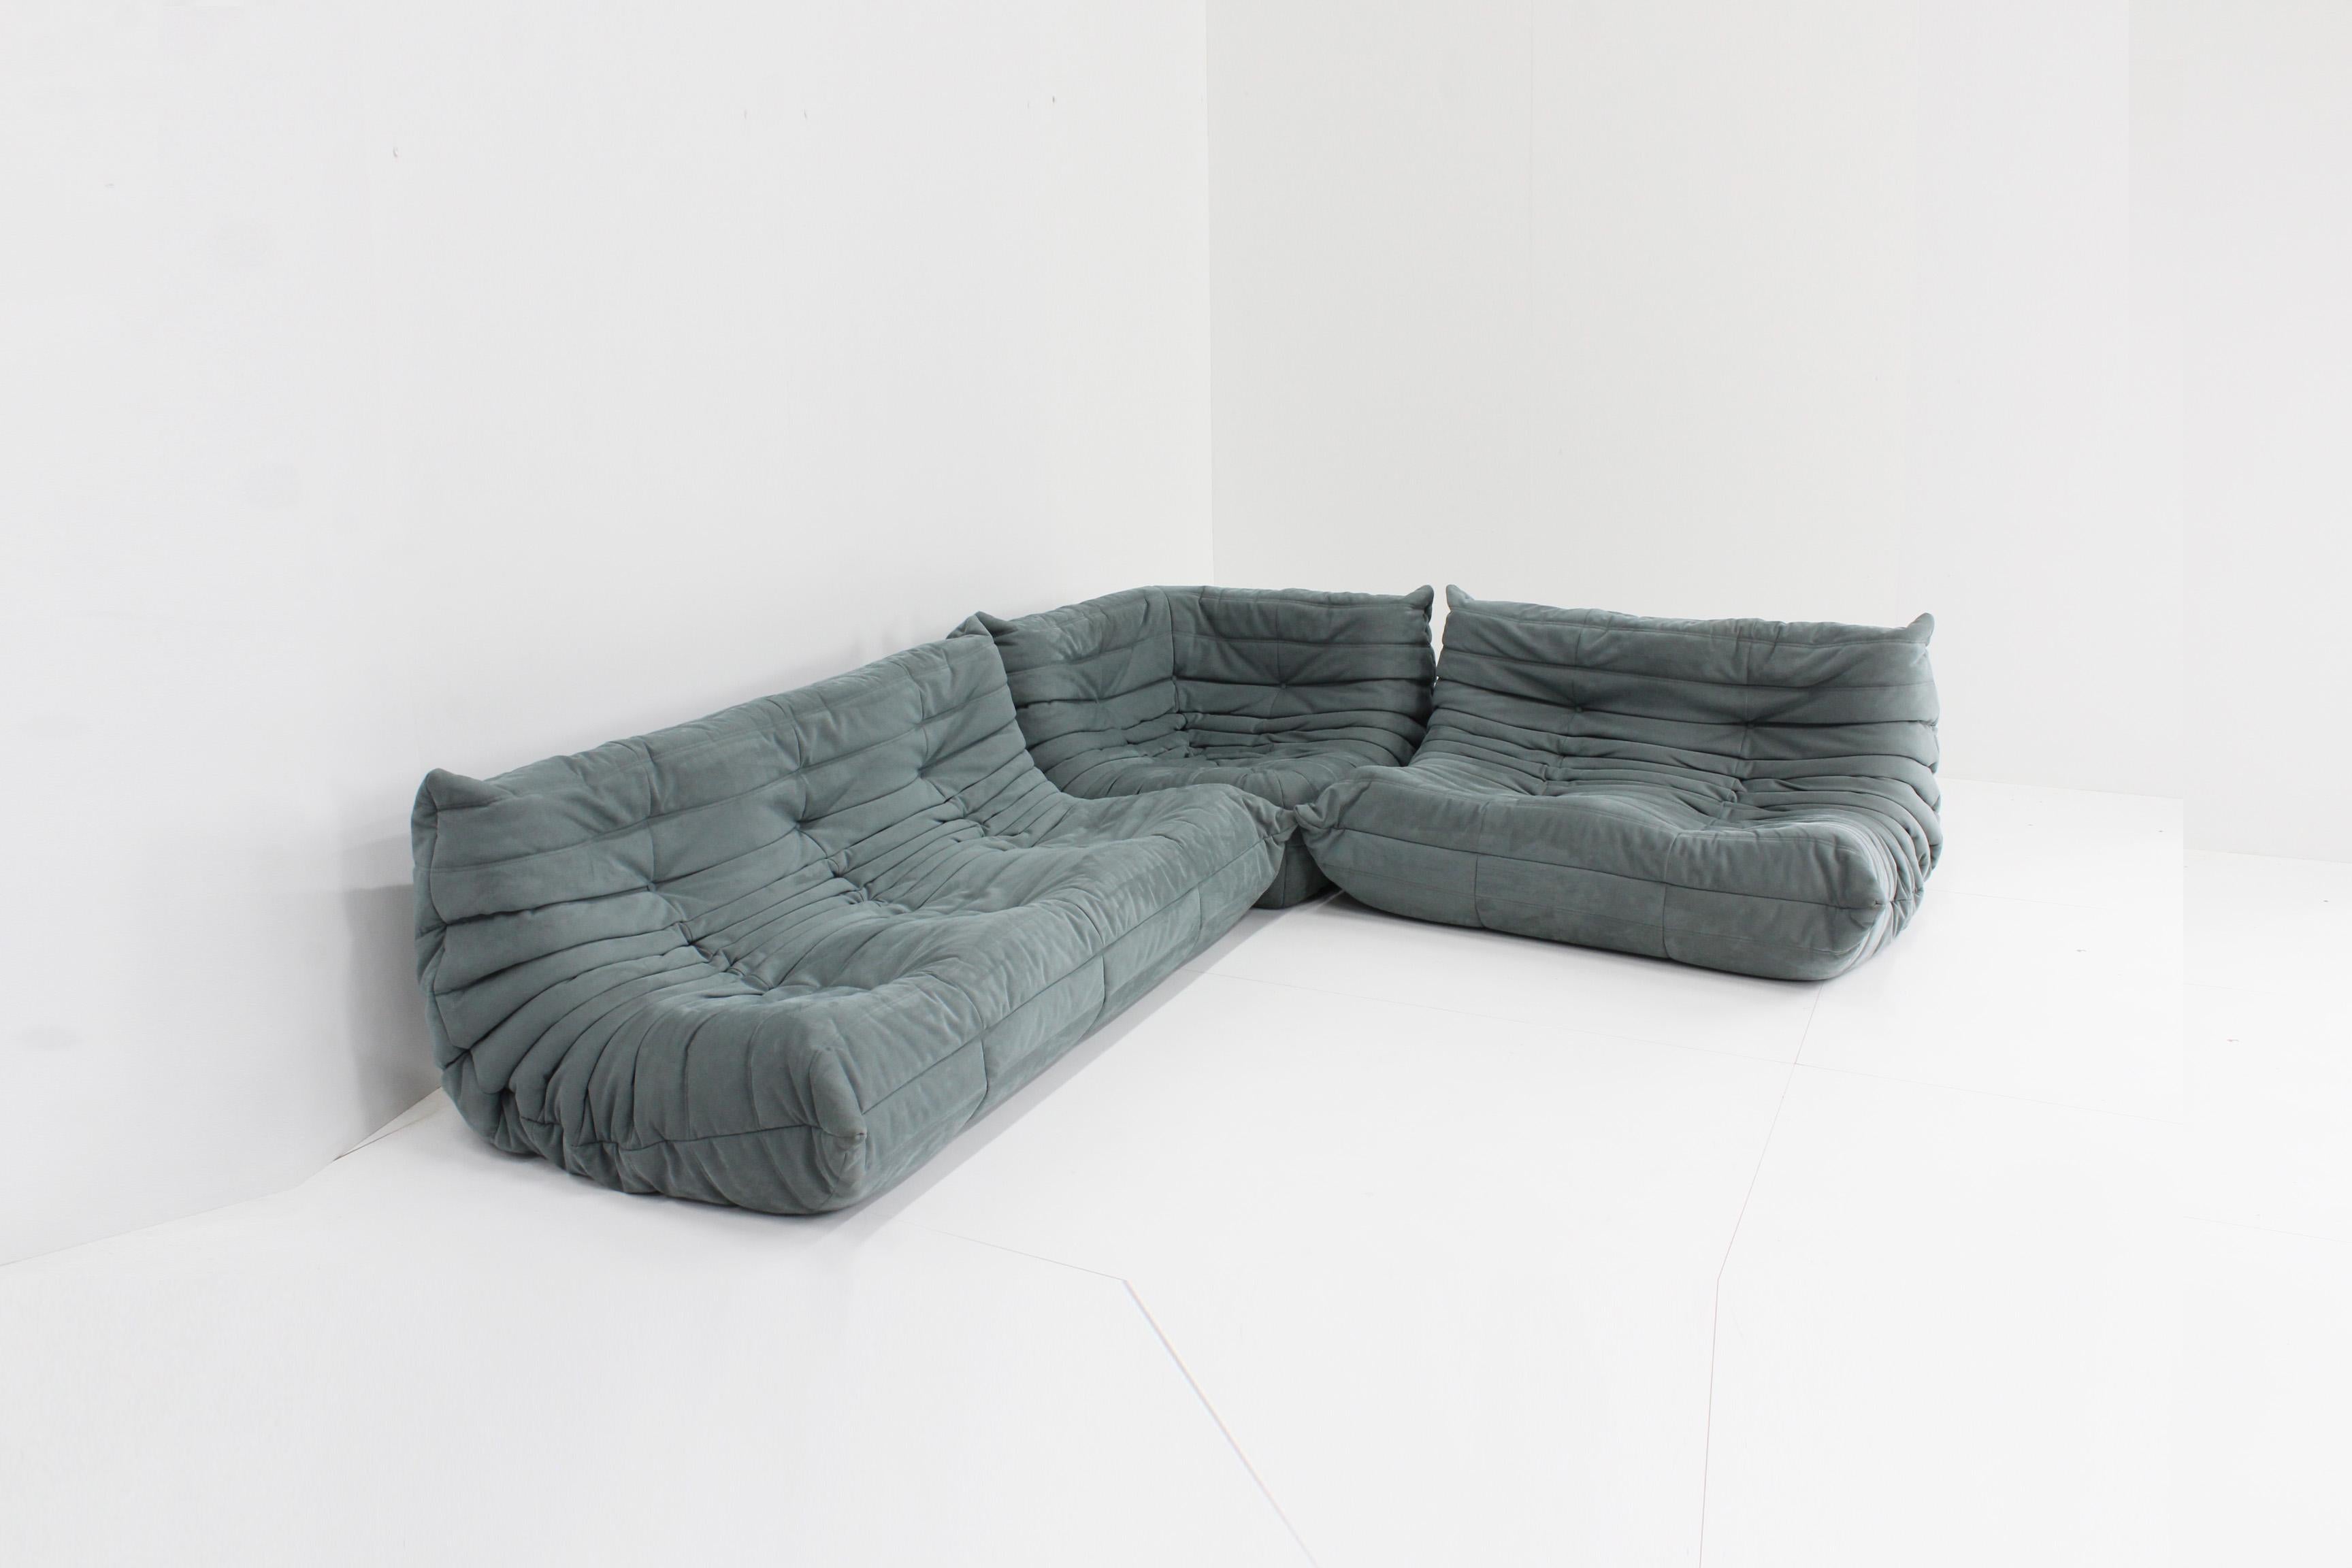 Original Togo sofa set by Ligne Roset designed by Michel Ducaroy. This is an original set from 2015 in alacantra. The color is light grey but has a tinge of blue in it. On the ligne Roset site this is colour code ‘baby grey'. The set consists of a 3